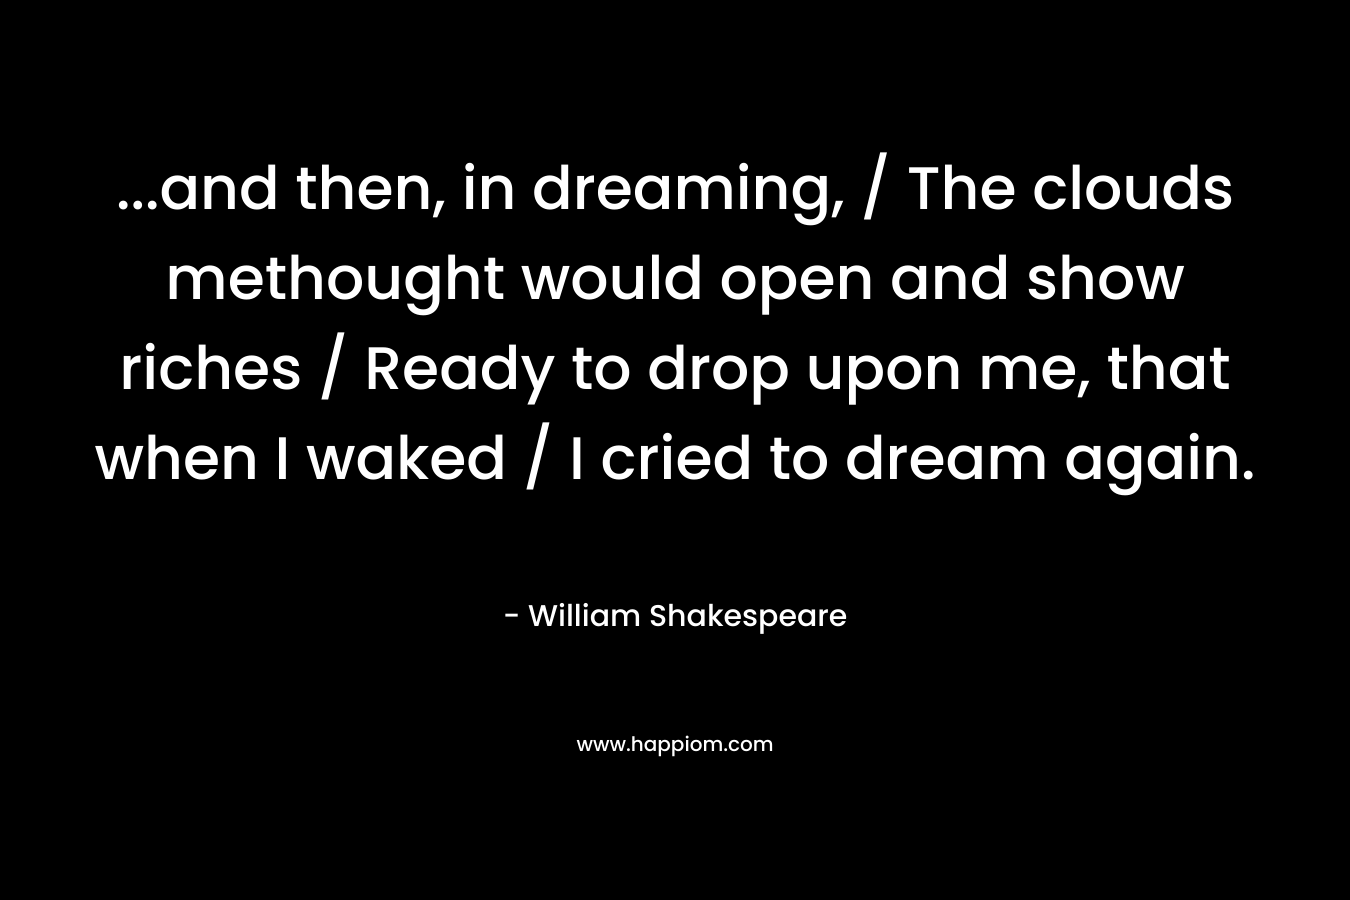 …and then, in dreaming, / The clouds methought would open and show riches / Ready to drop upon me, that when I waked / I cried to dream again. – William Shakespeare